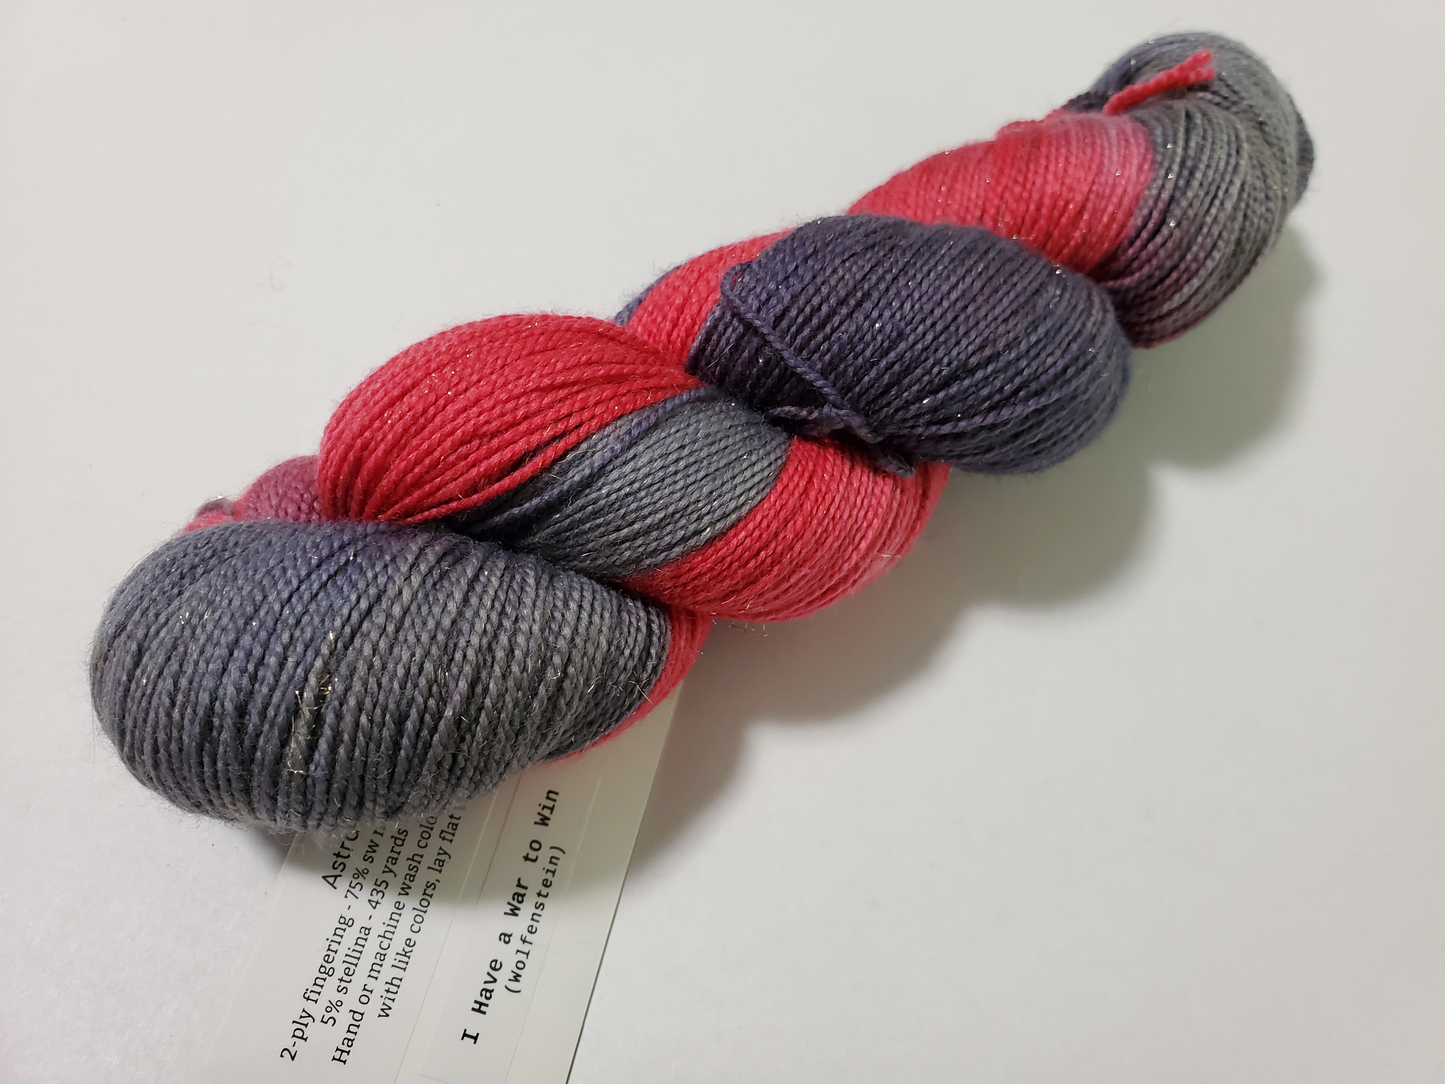 Nerd Girl Yarns Astral - I Have a War to Win